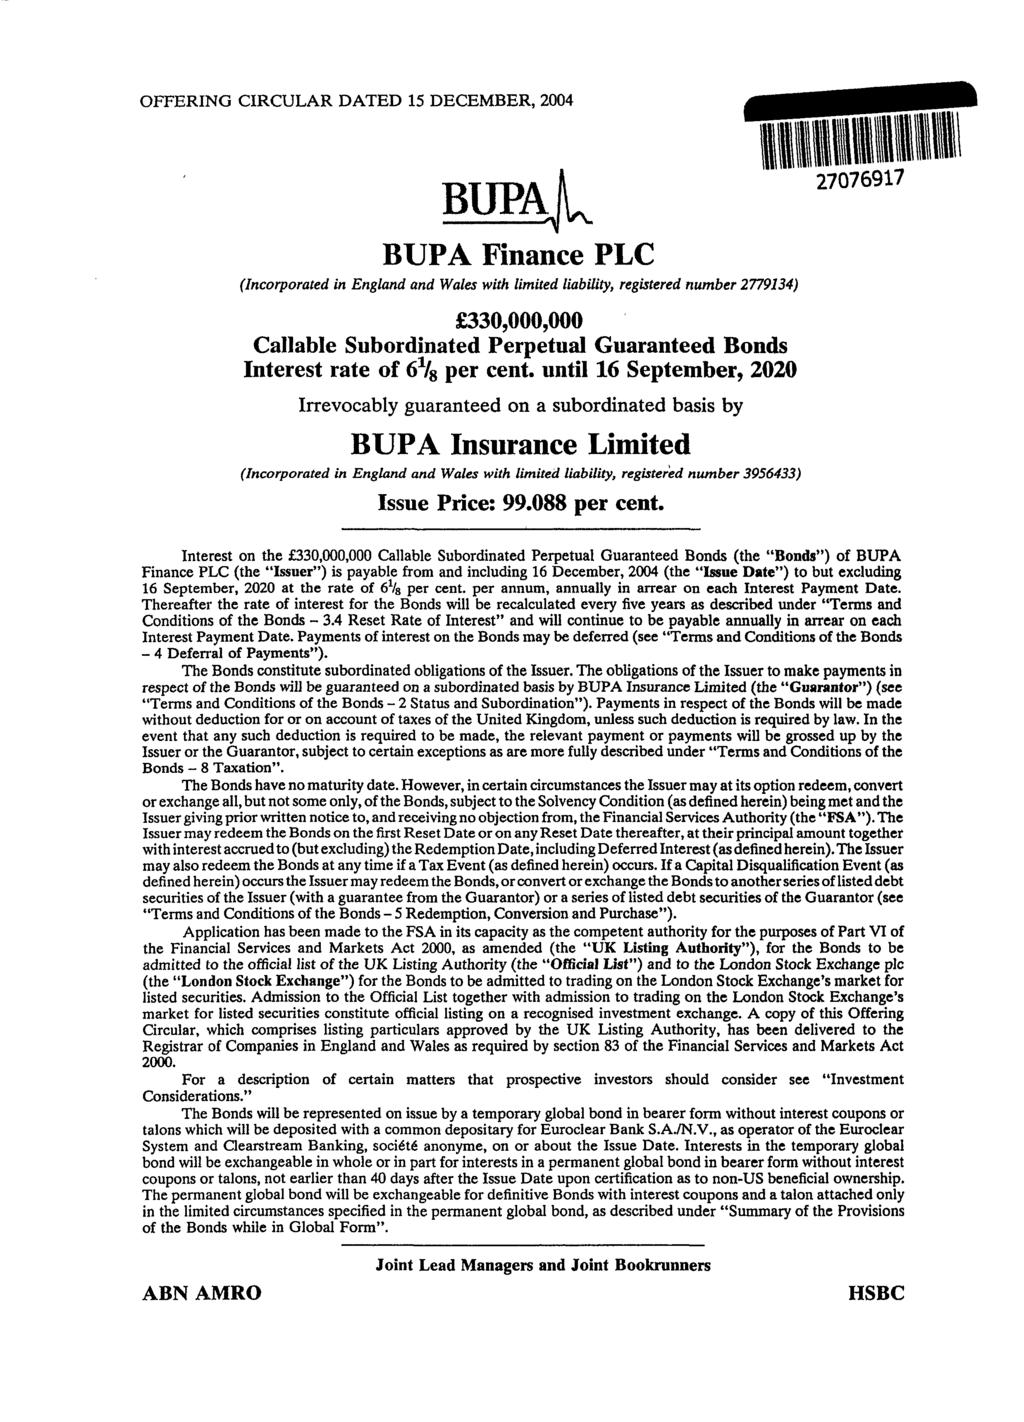 OFFERING CIRCULAR DATED 15 DECEMBER, 2004 BUPA BUPA Finance PLC (Incorporated in England and Wales with limited liability, registered number 2779134) 330,000,000 Callable Subordinated Perpetual